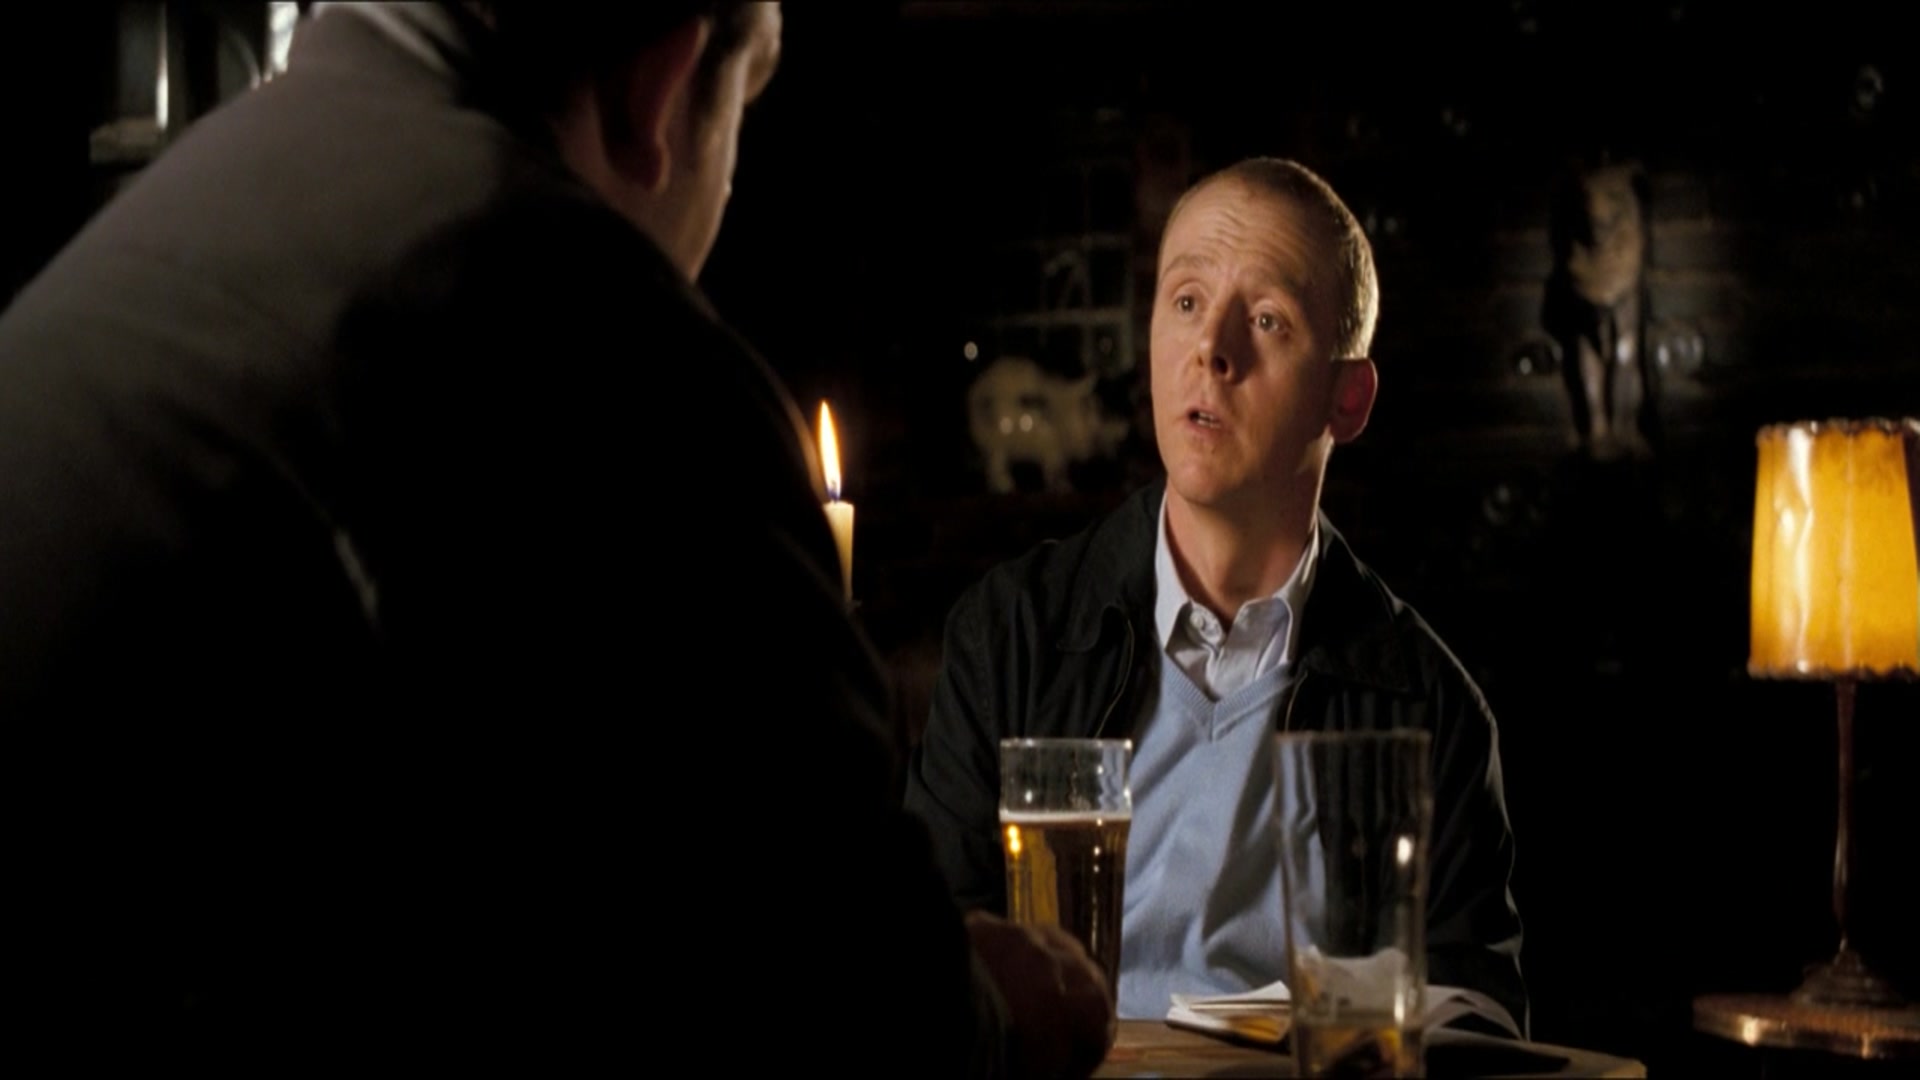 Simon Pegg (center) as Sergeant Nicholas Angel in a pub in the movie Hot Fuzz.